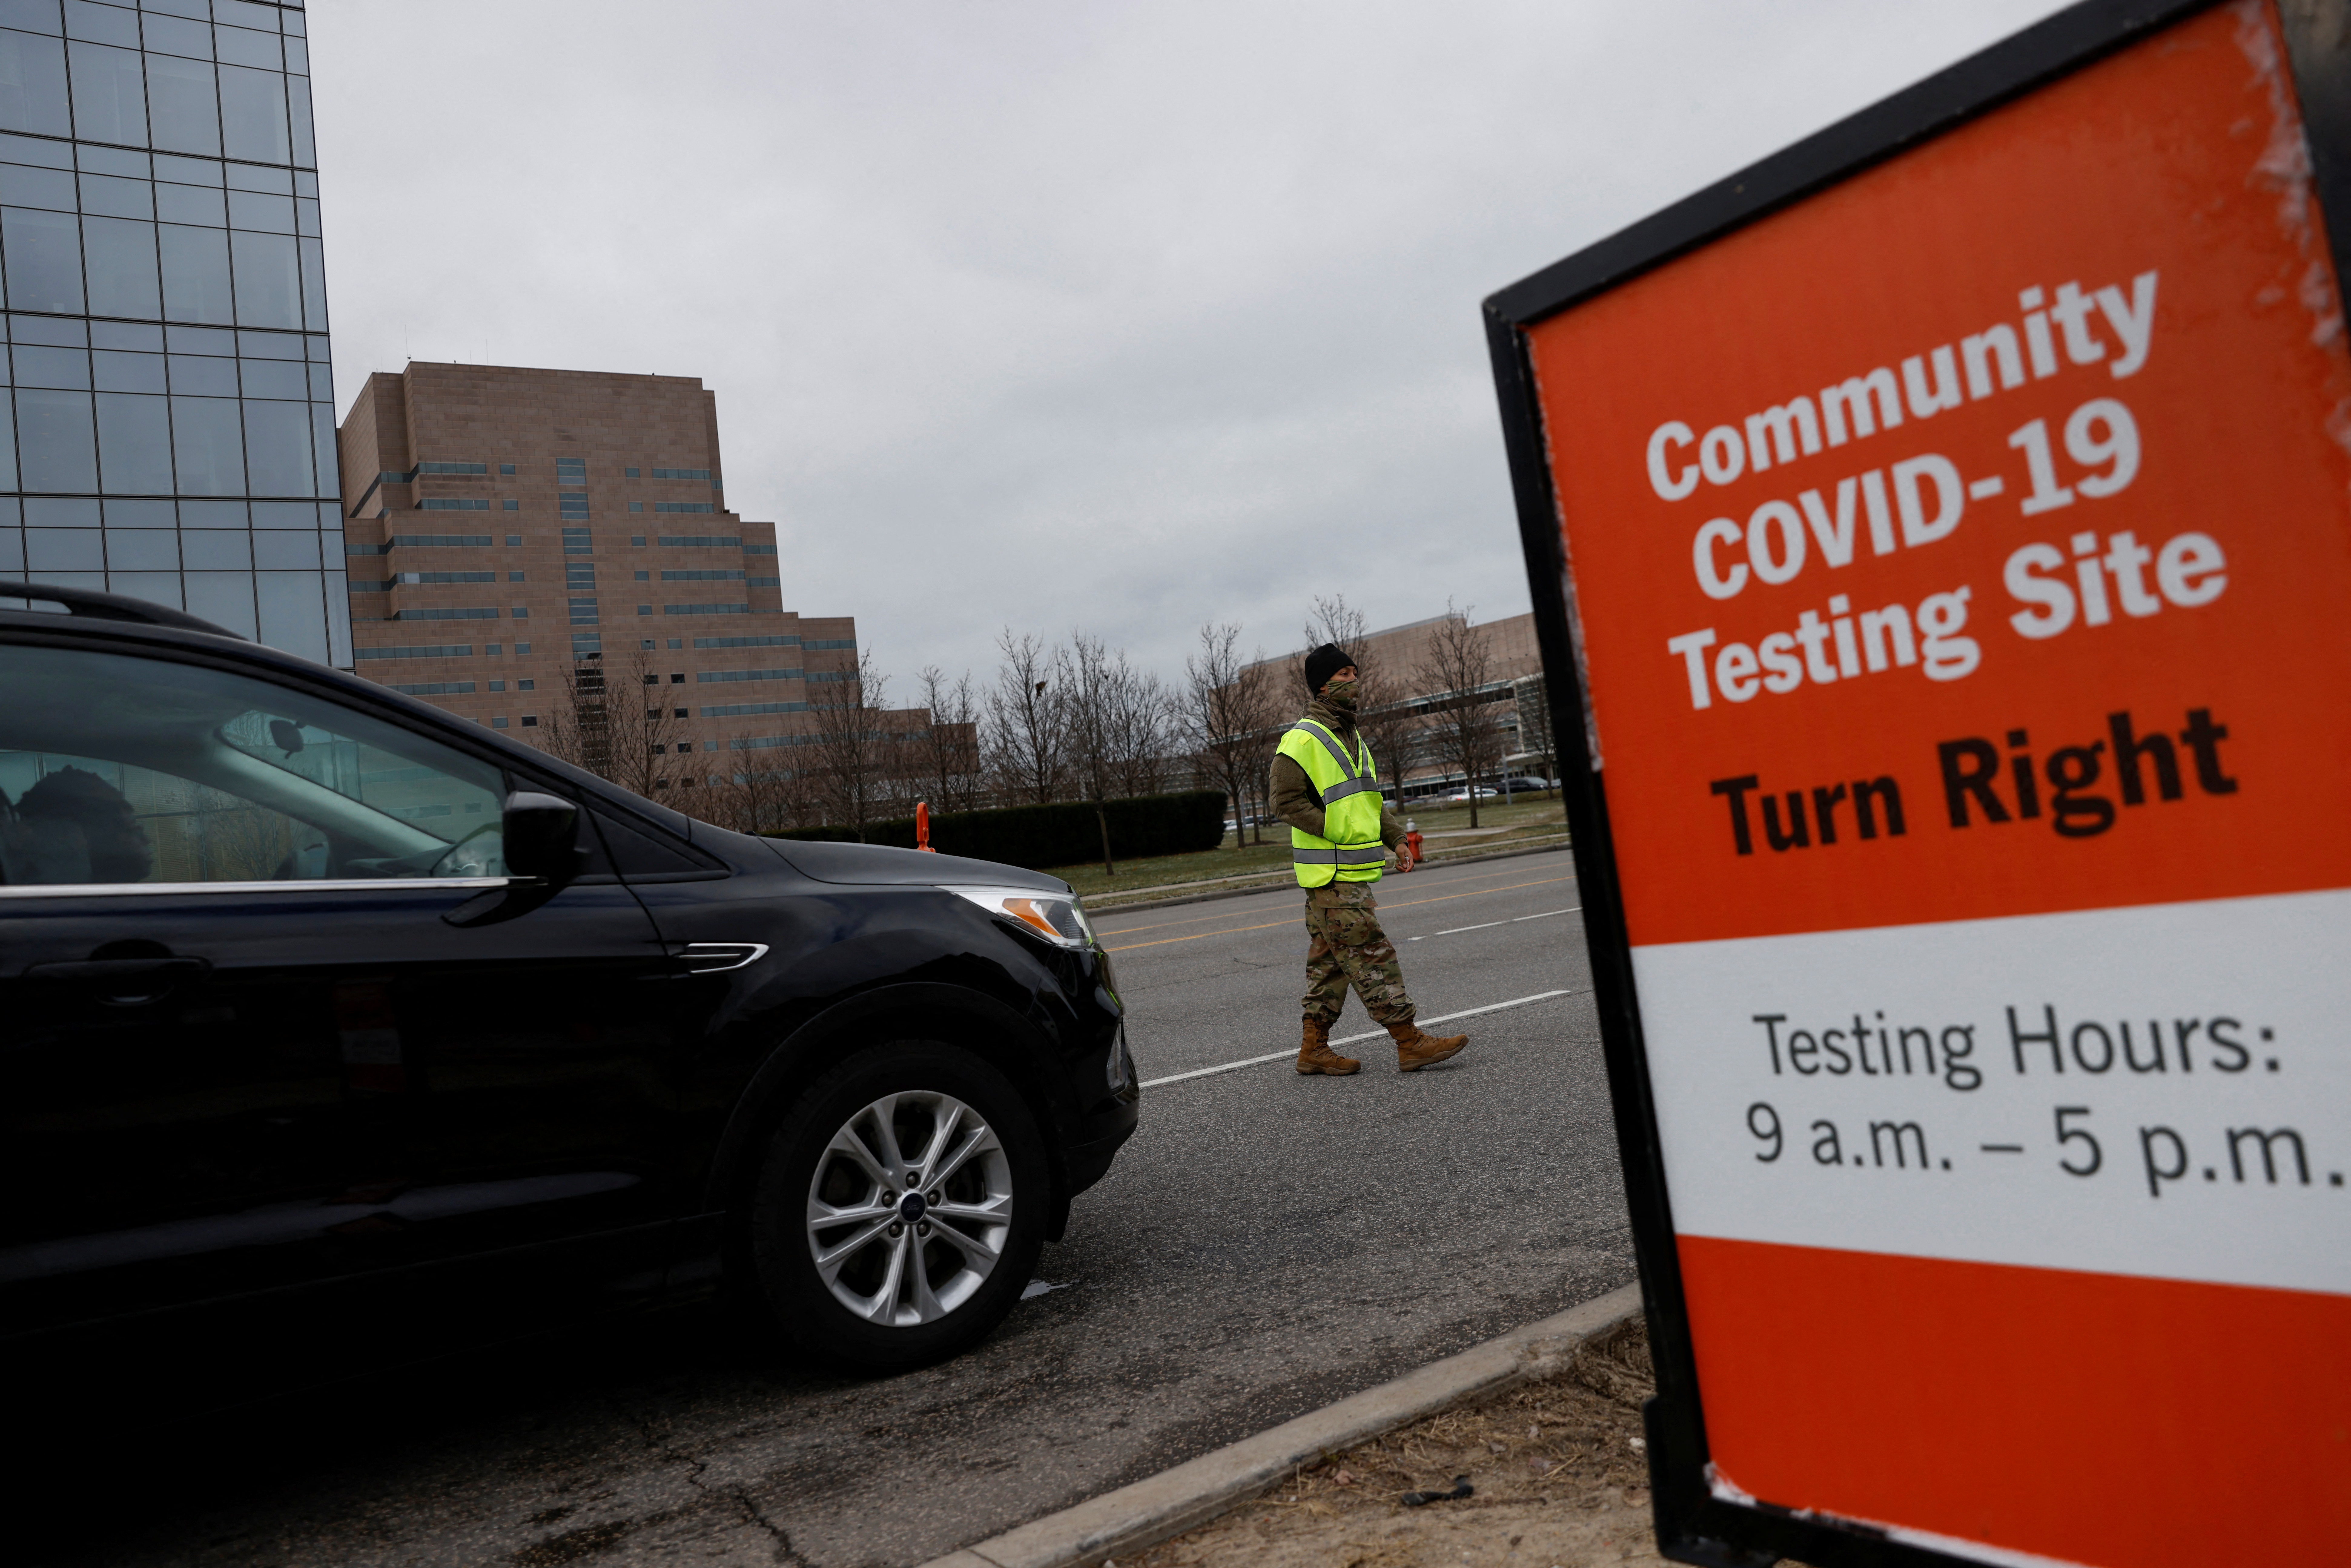 A member of the Ohio National Guard directs cars entering a testing site amid the coronavirus disease (COVID-19) pandemic, in Cleveland, Ohio